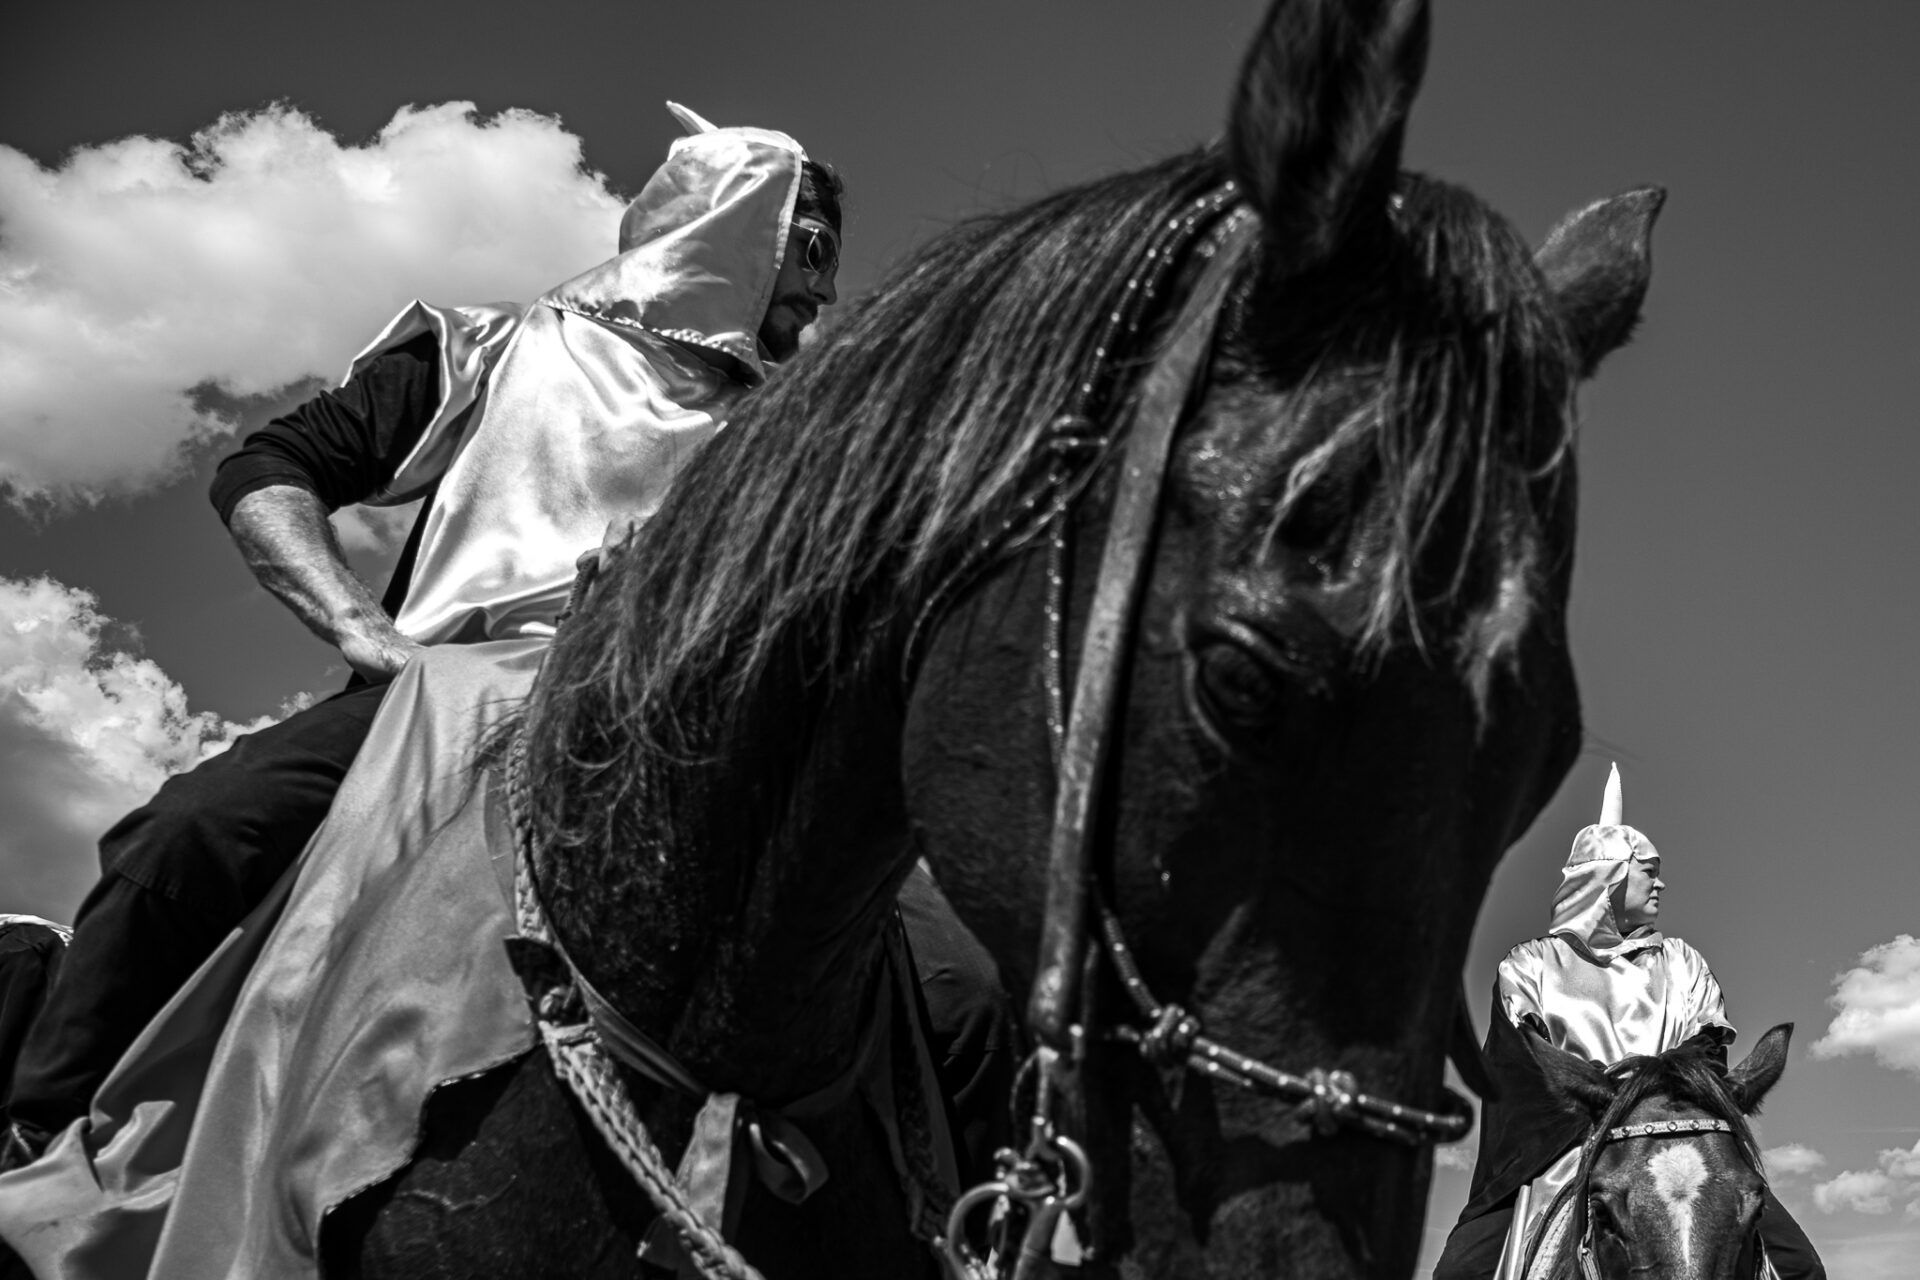 A man and woman on horses